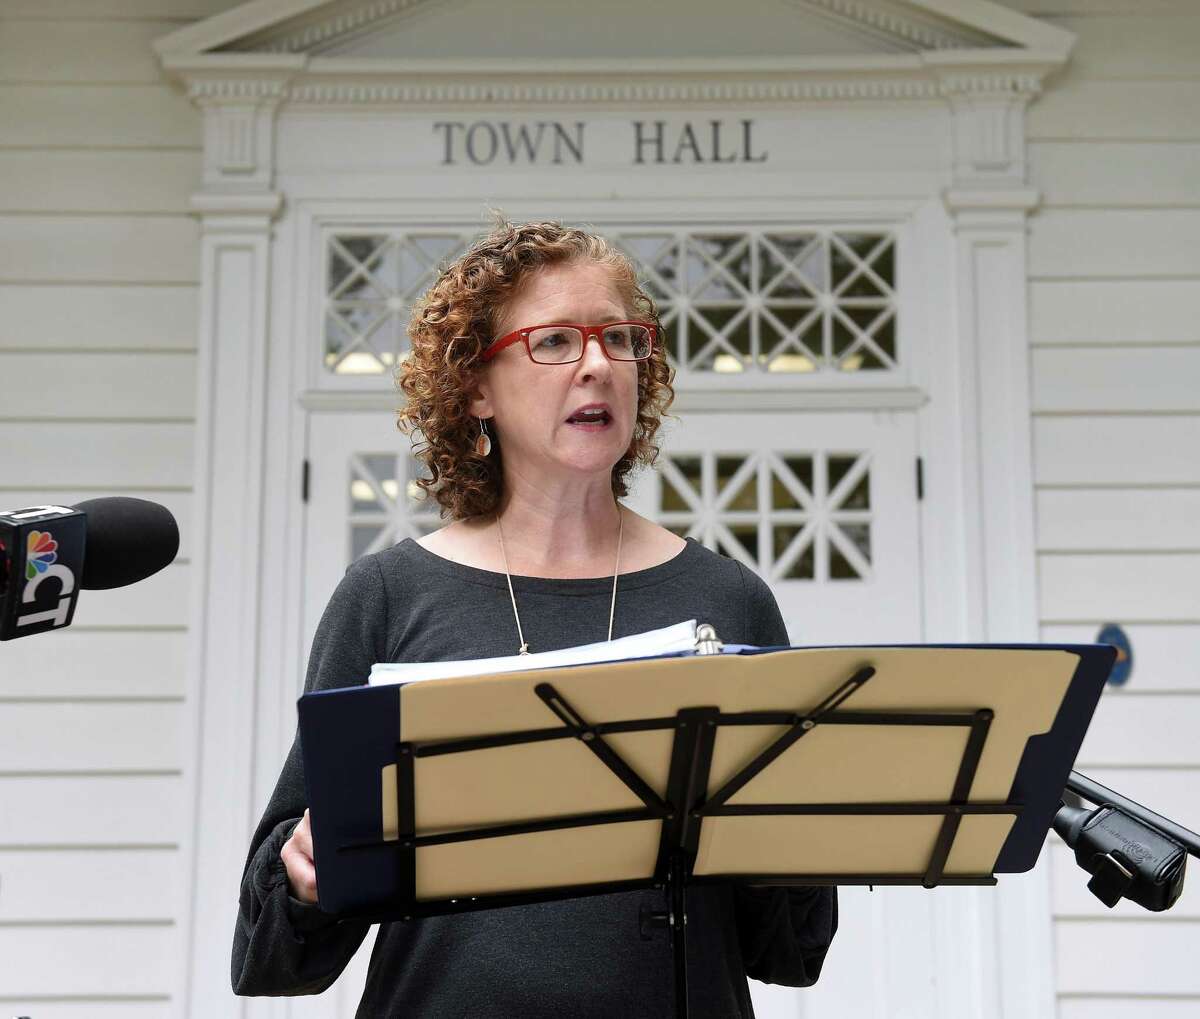 Erin Boggs, executive director of Open Communities Alliance, speaks in front of Woodbridge Town Hall on September 29, 2020 concerning the organization's challenge to the town's zoning laws restricting multi-family developments of 3 or more units.